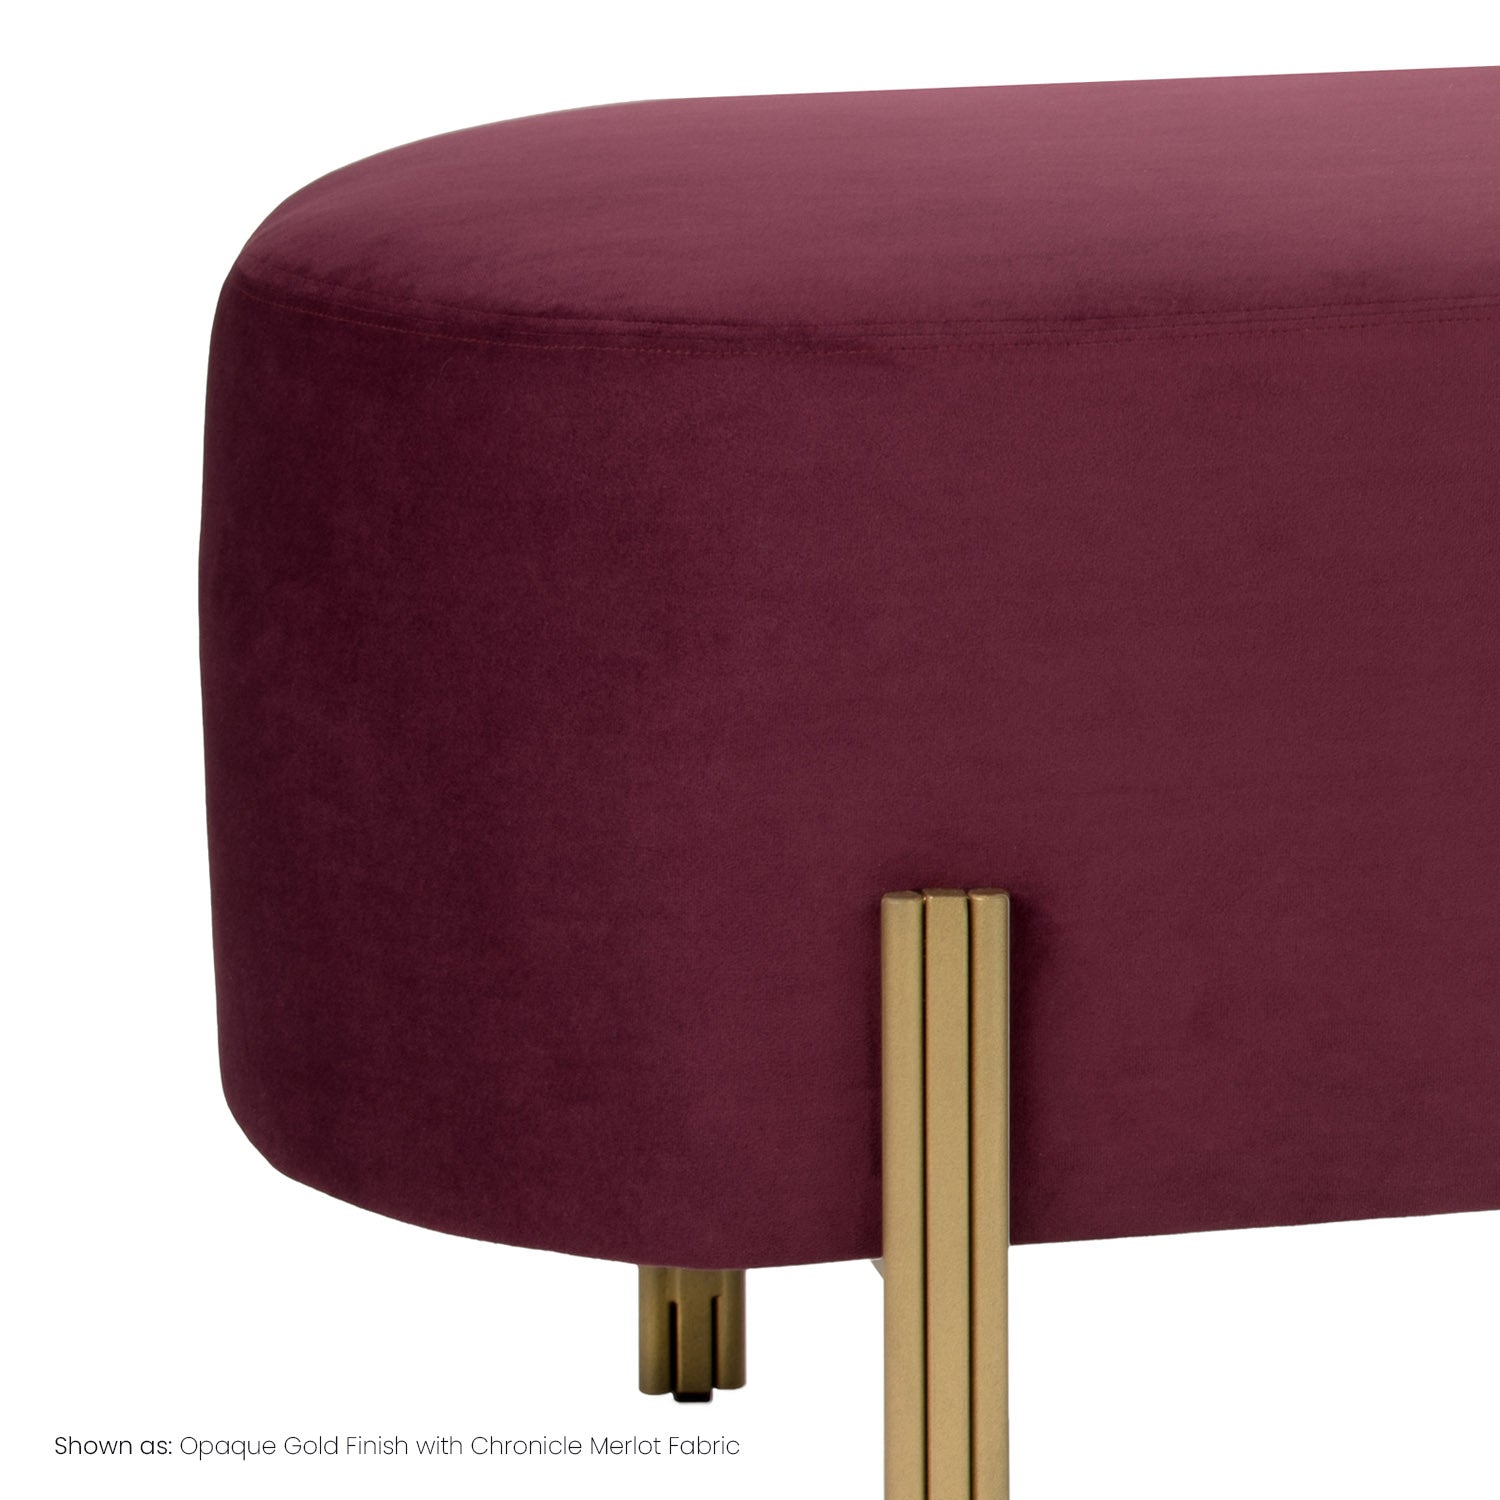 Wesley Allen in Opaque Gold Finish and Chronicle Merlot Fabric